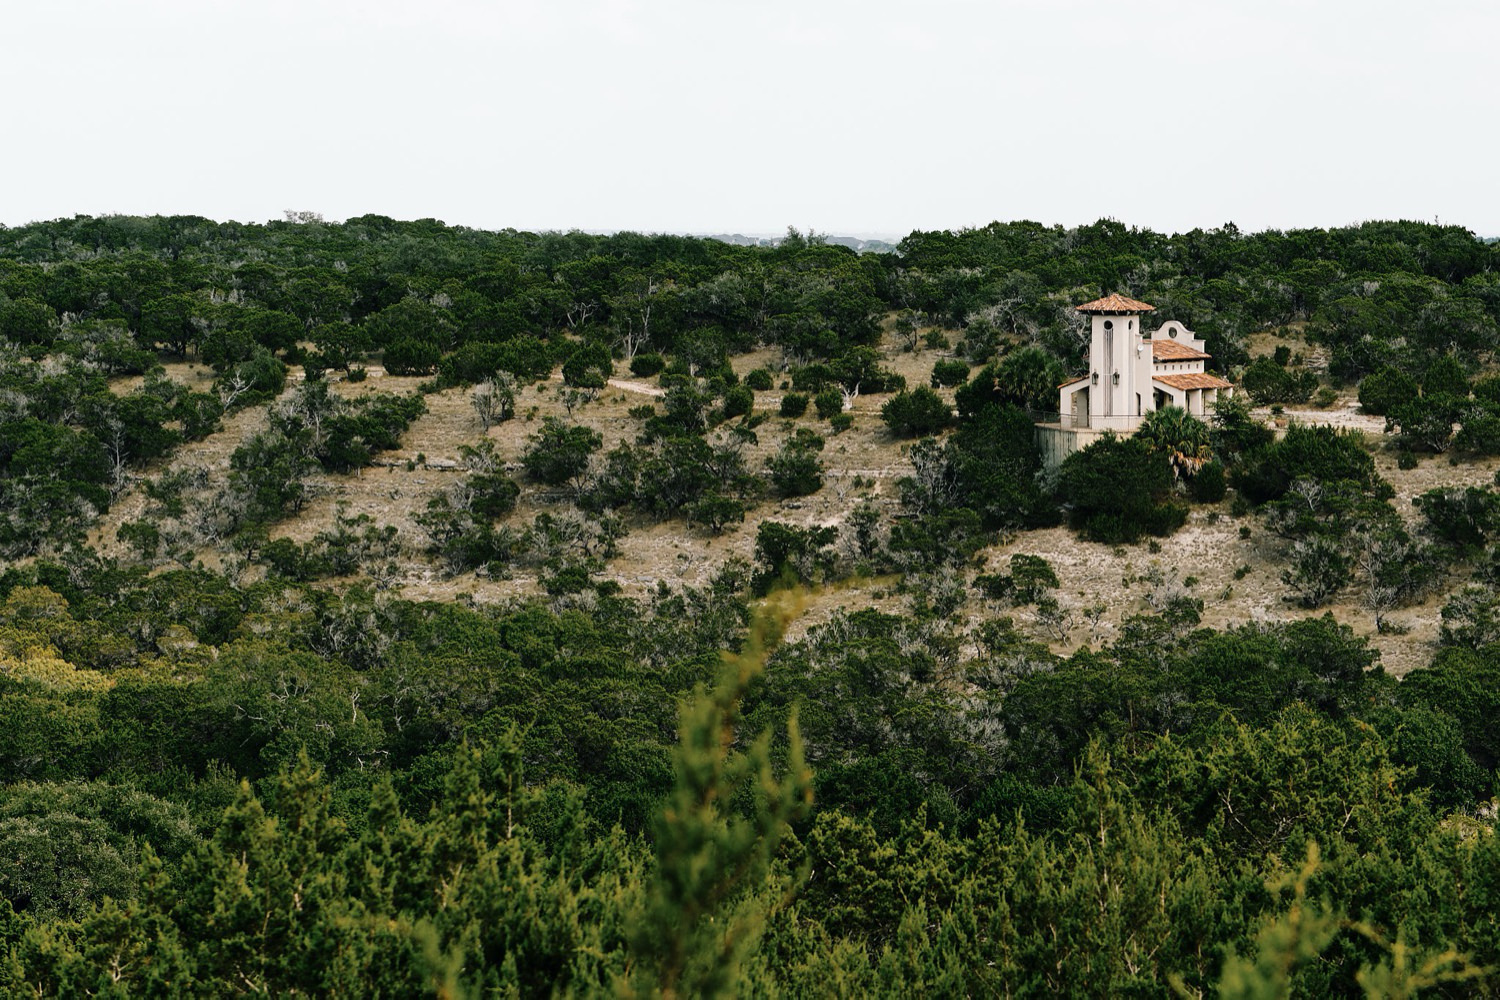 Chapel Dulcinea, one of the treasures of the Wedding Capital of Texas hill country. Photographs by Mercedes Morgan Photography, Austin Wedding Photographers